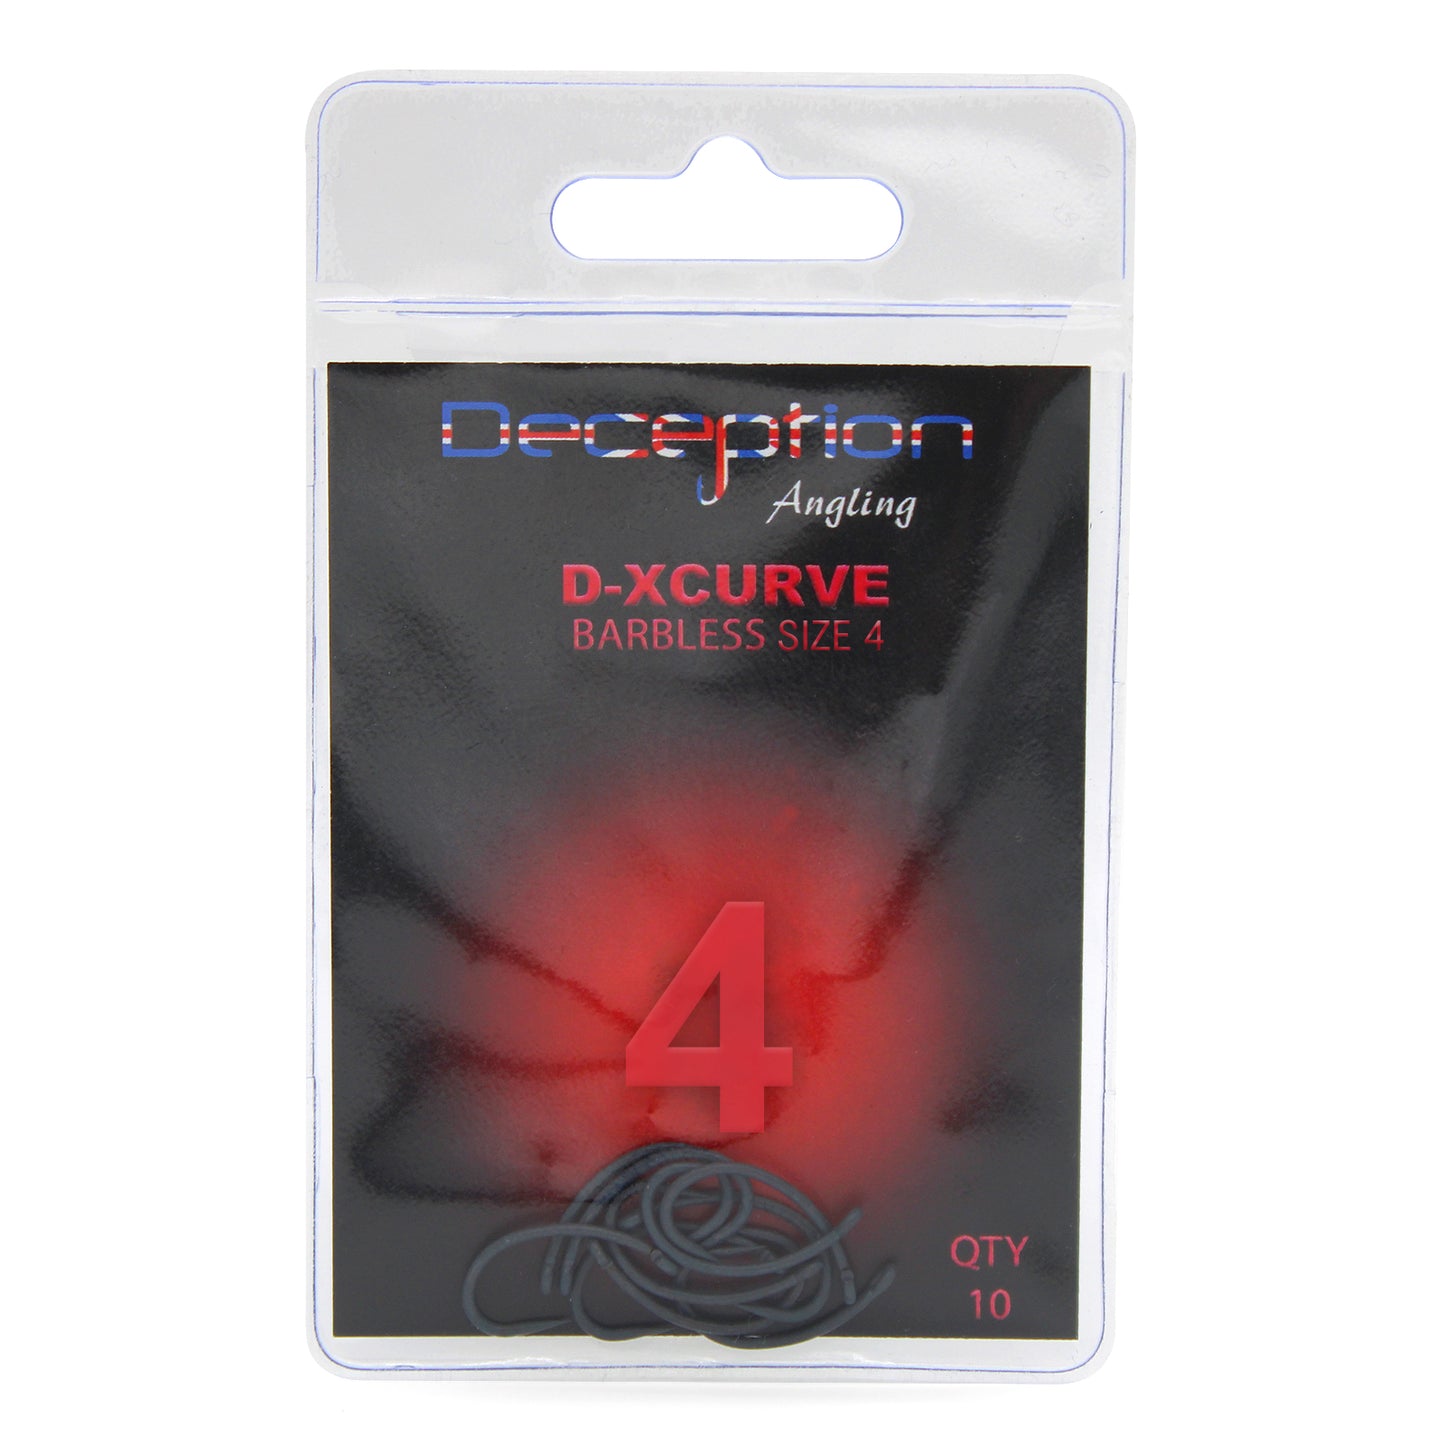 Deception Angling D-XCurve Barbless Fishing Hooks Pack of 10 Size 4